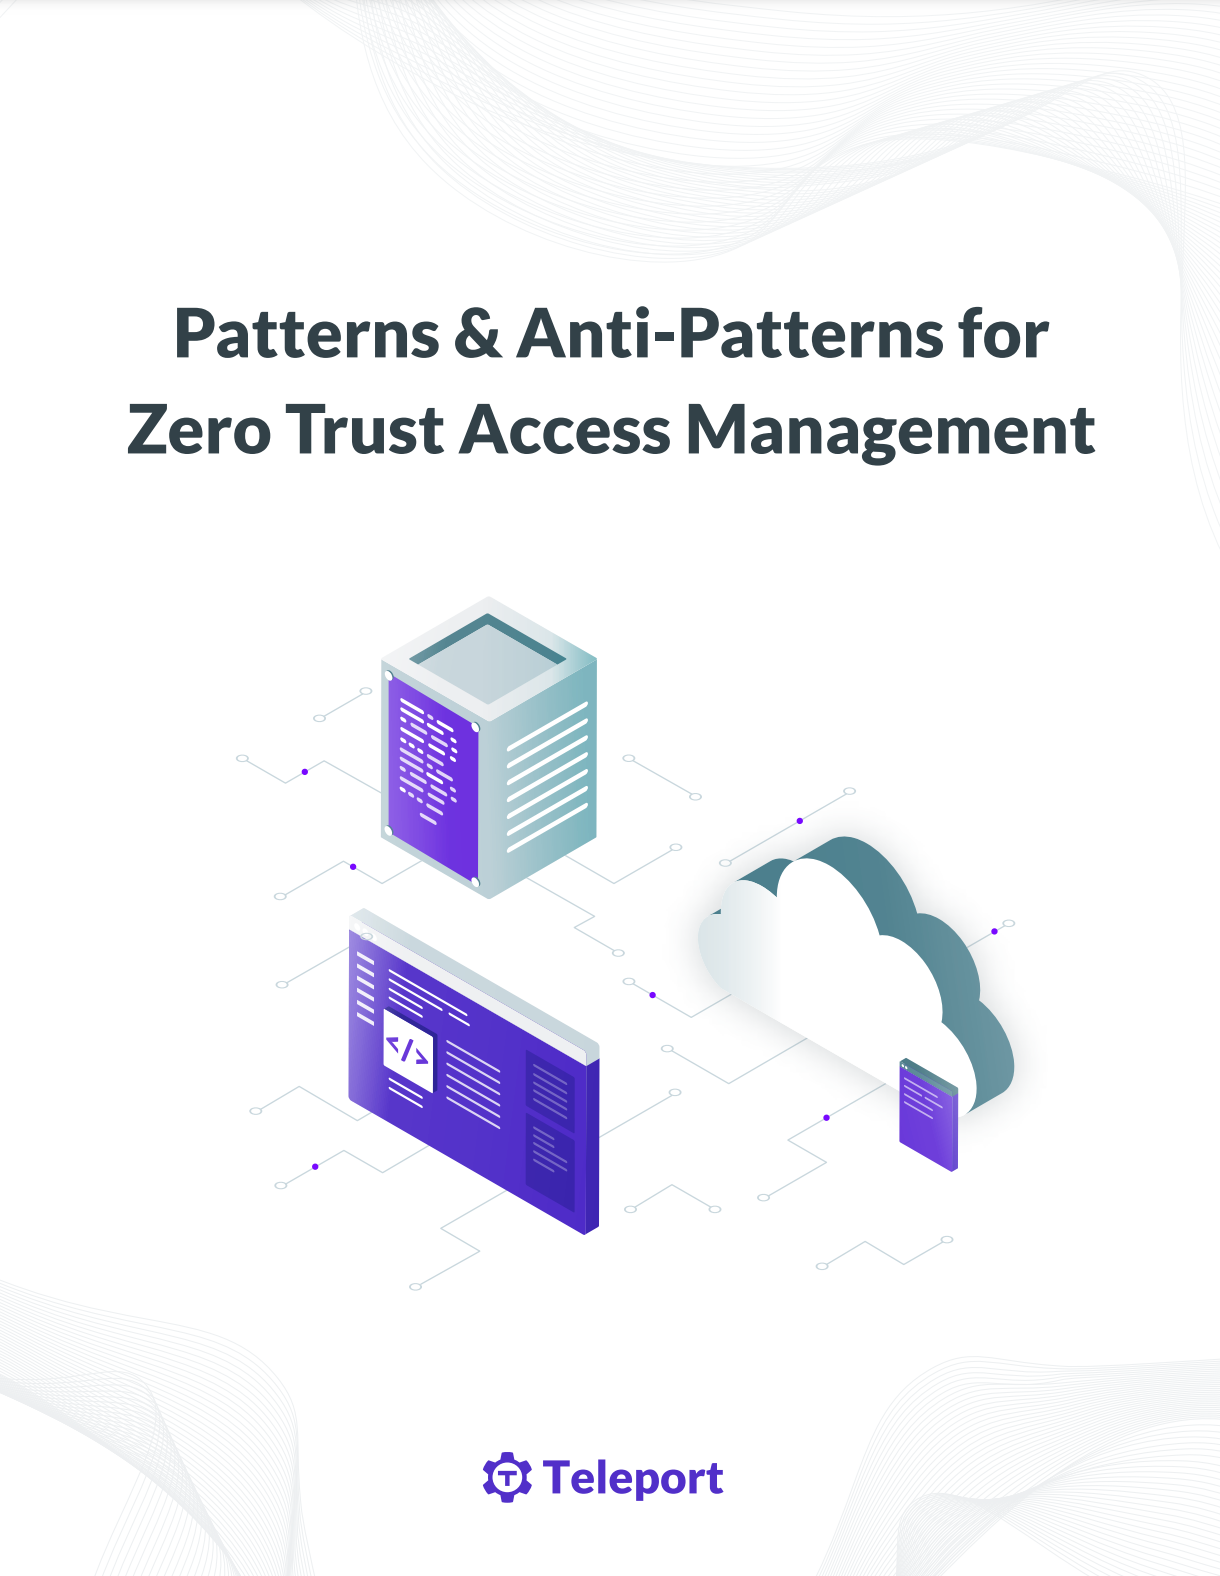 Book cover for "Zero Trust Access Management Best Practices"